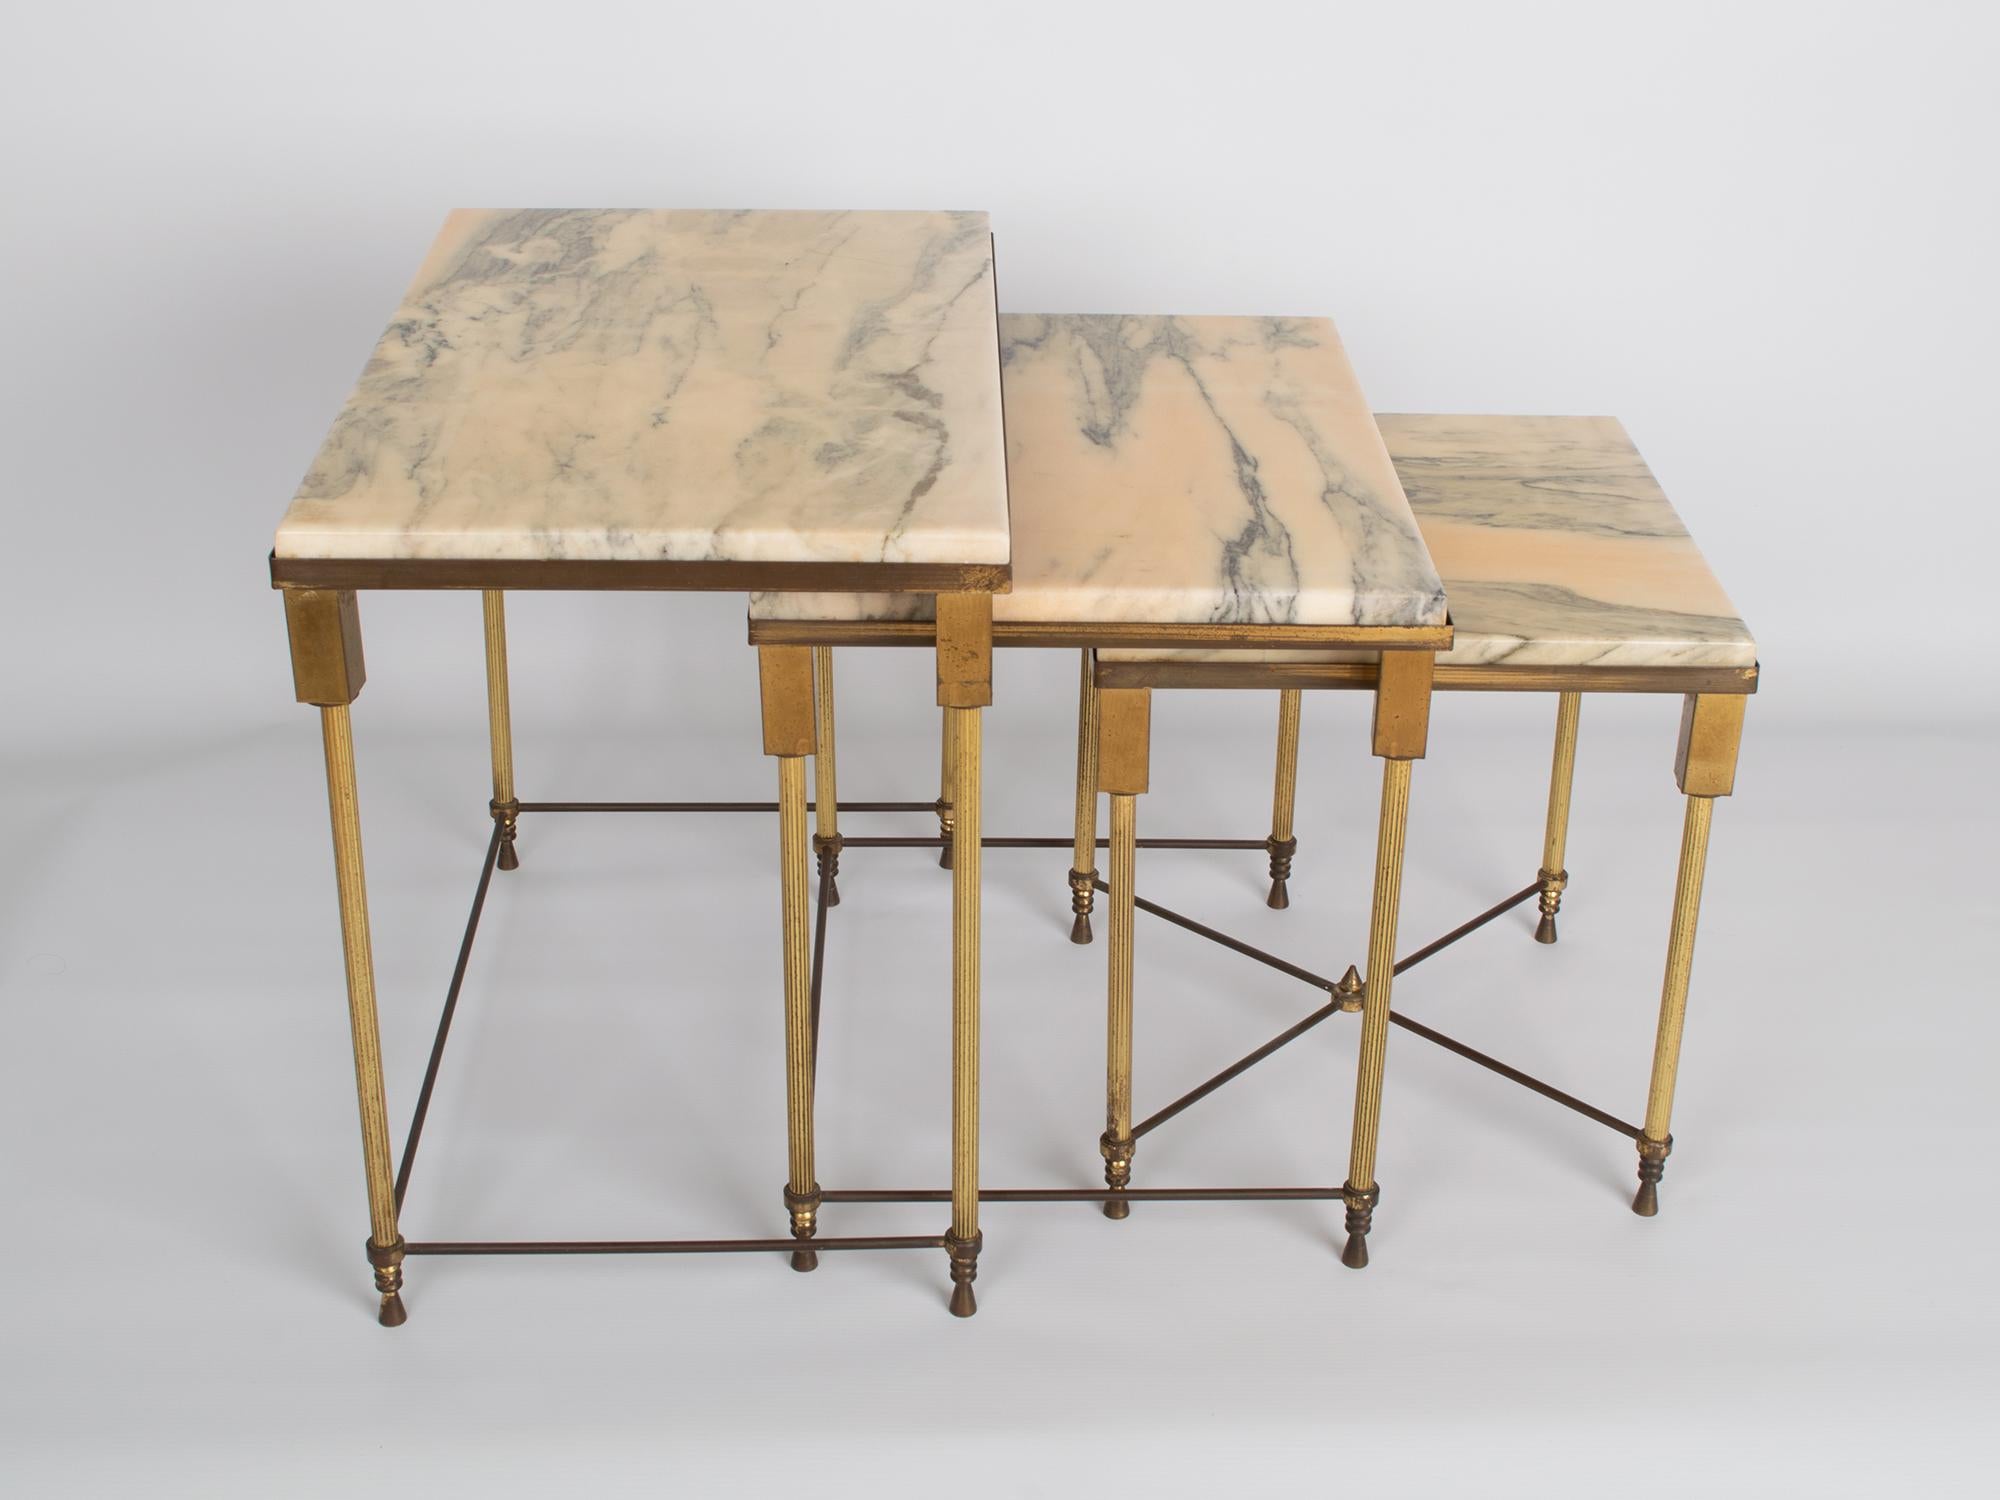 Hollywood Regency Brass and Marble Nesting Tables by Maison Jansen, France, circa 1940 For Sale